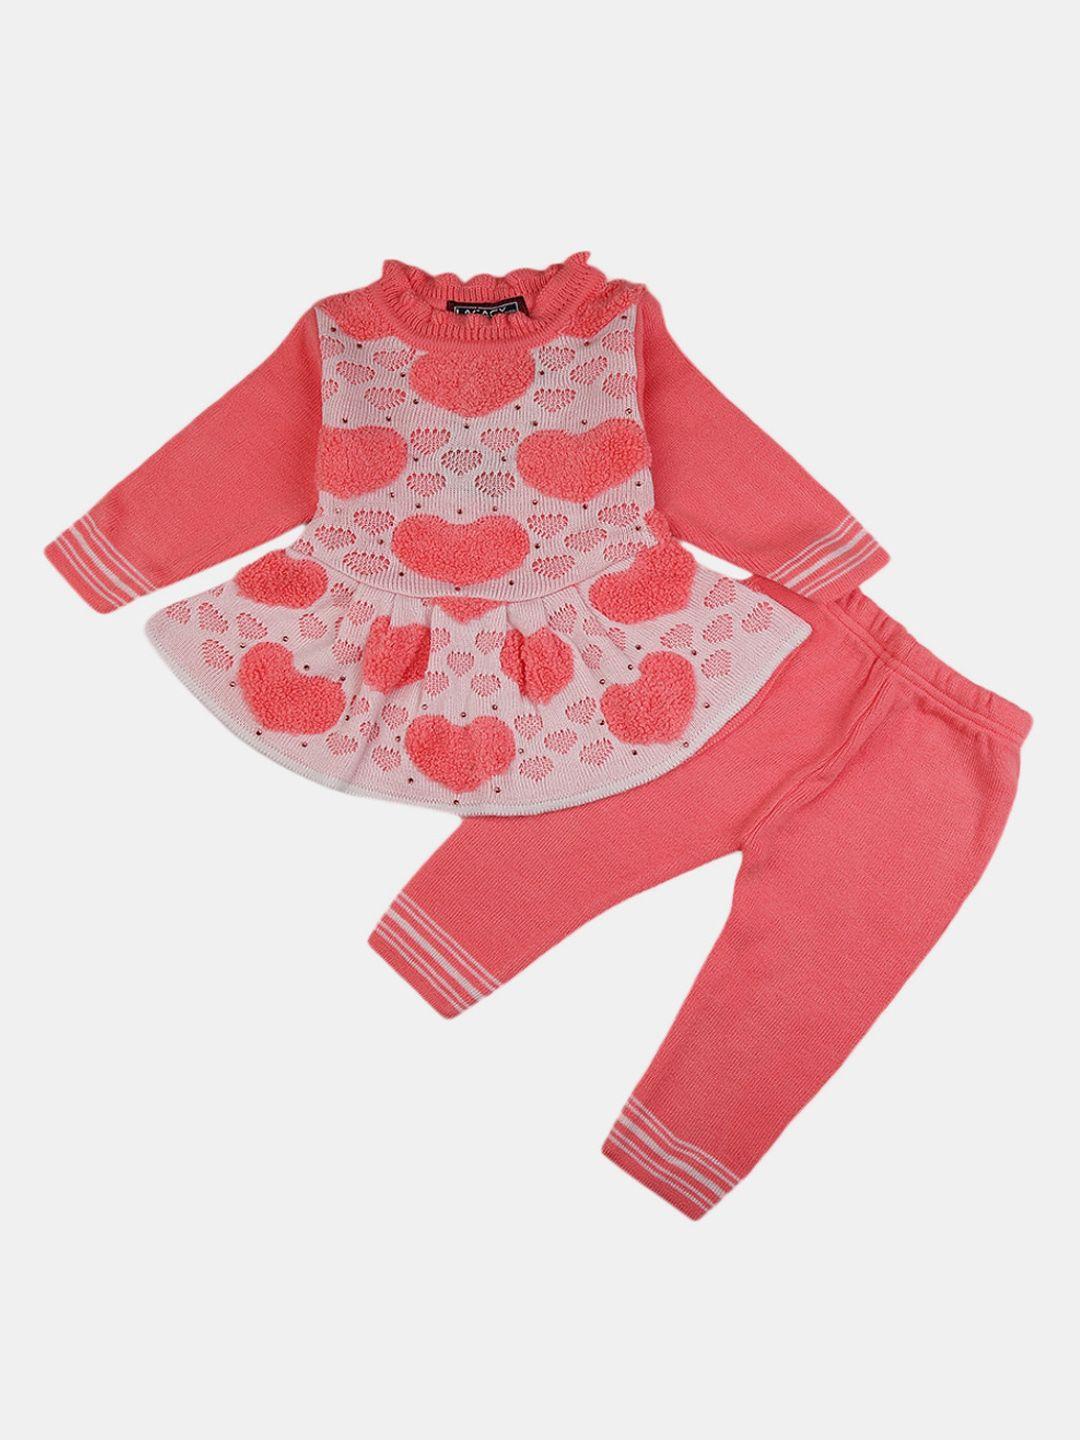 v-mart unisex kids peach-coloured & white tunic with trousers